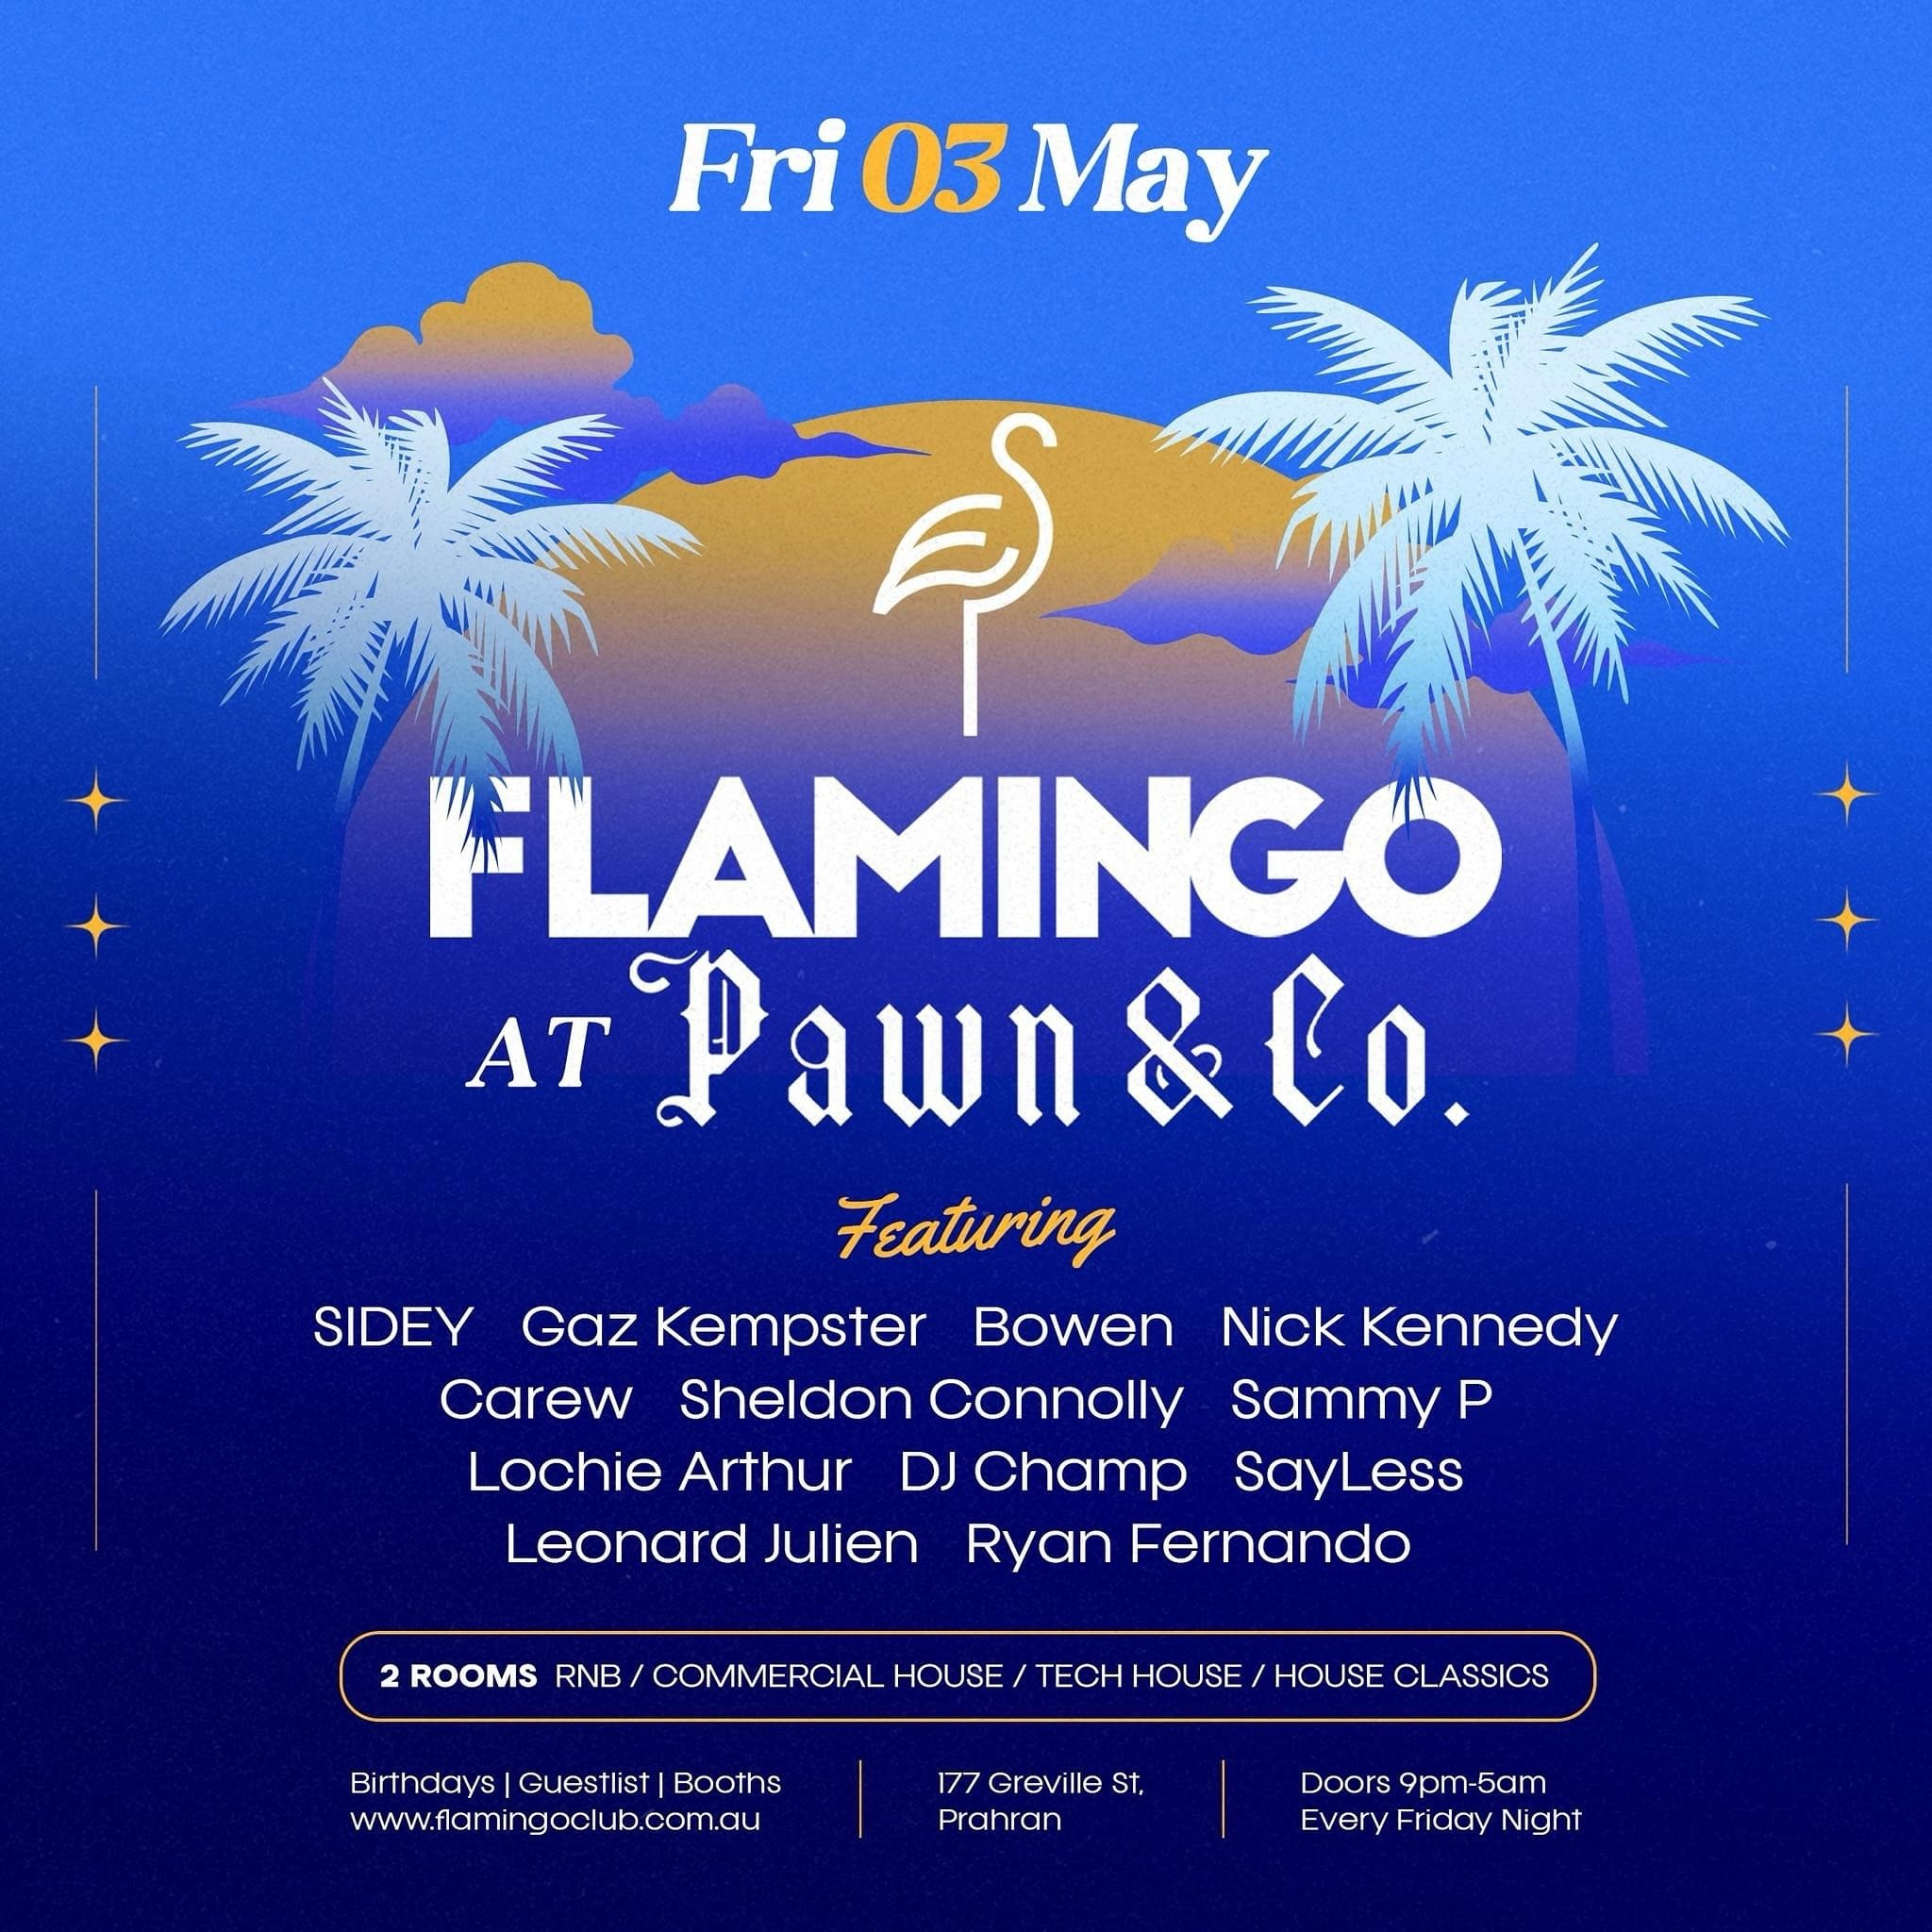 This autumn there&rsquo;s only one place to be in Melbourne-Flamingo at Pawn &amp; Co!🙌🔥 
Come join us this Friday and let the hot vibes and music keep you warm. Think Autumn, Think Flamingo!
...............................
Visit our website for ou